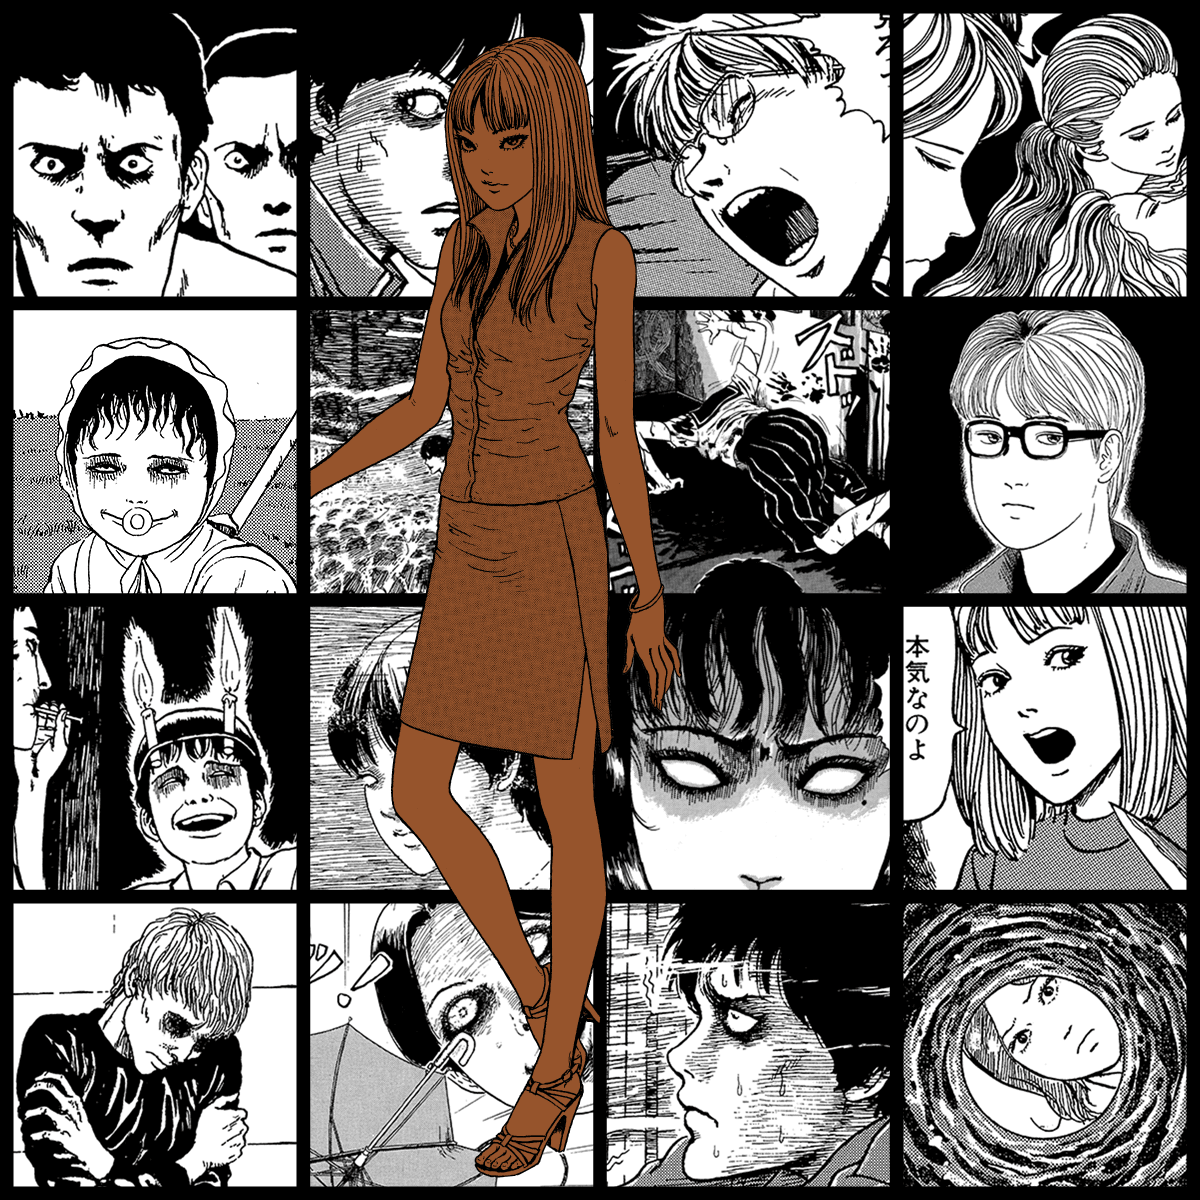 TOMIE by Junji Ito #1532